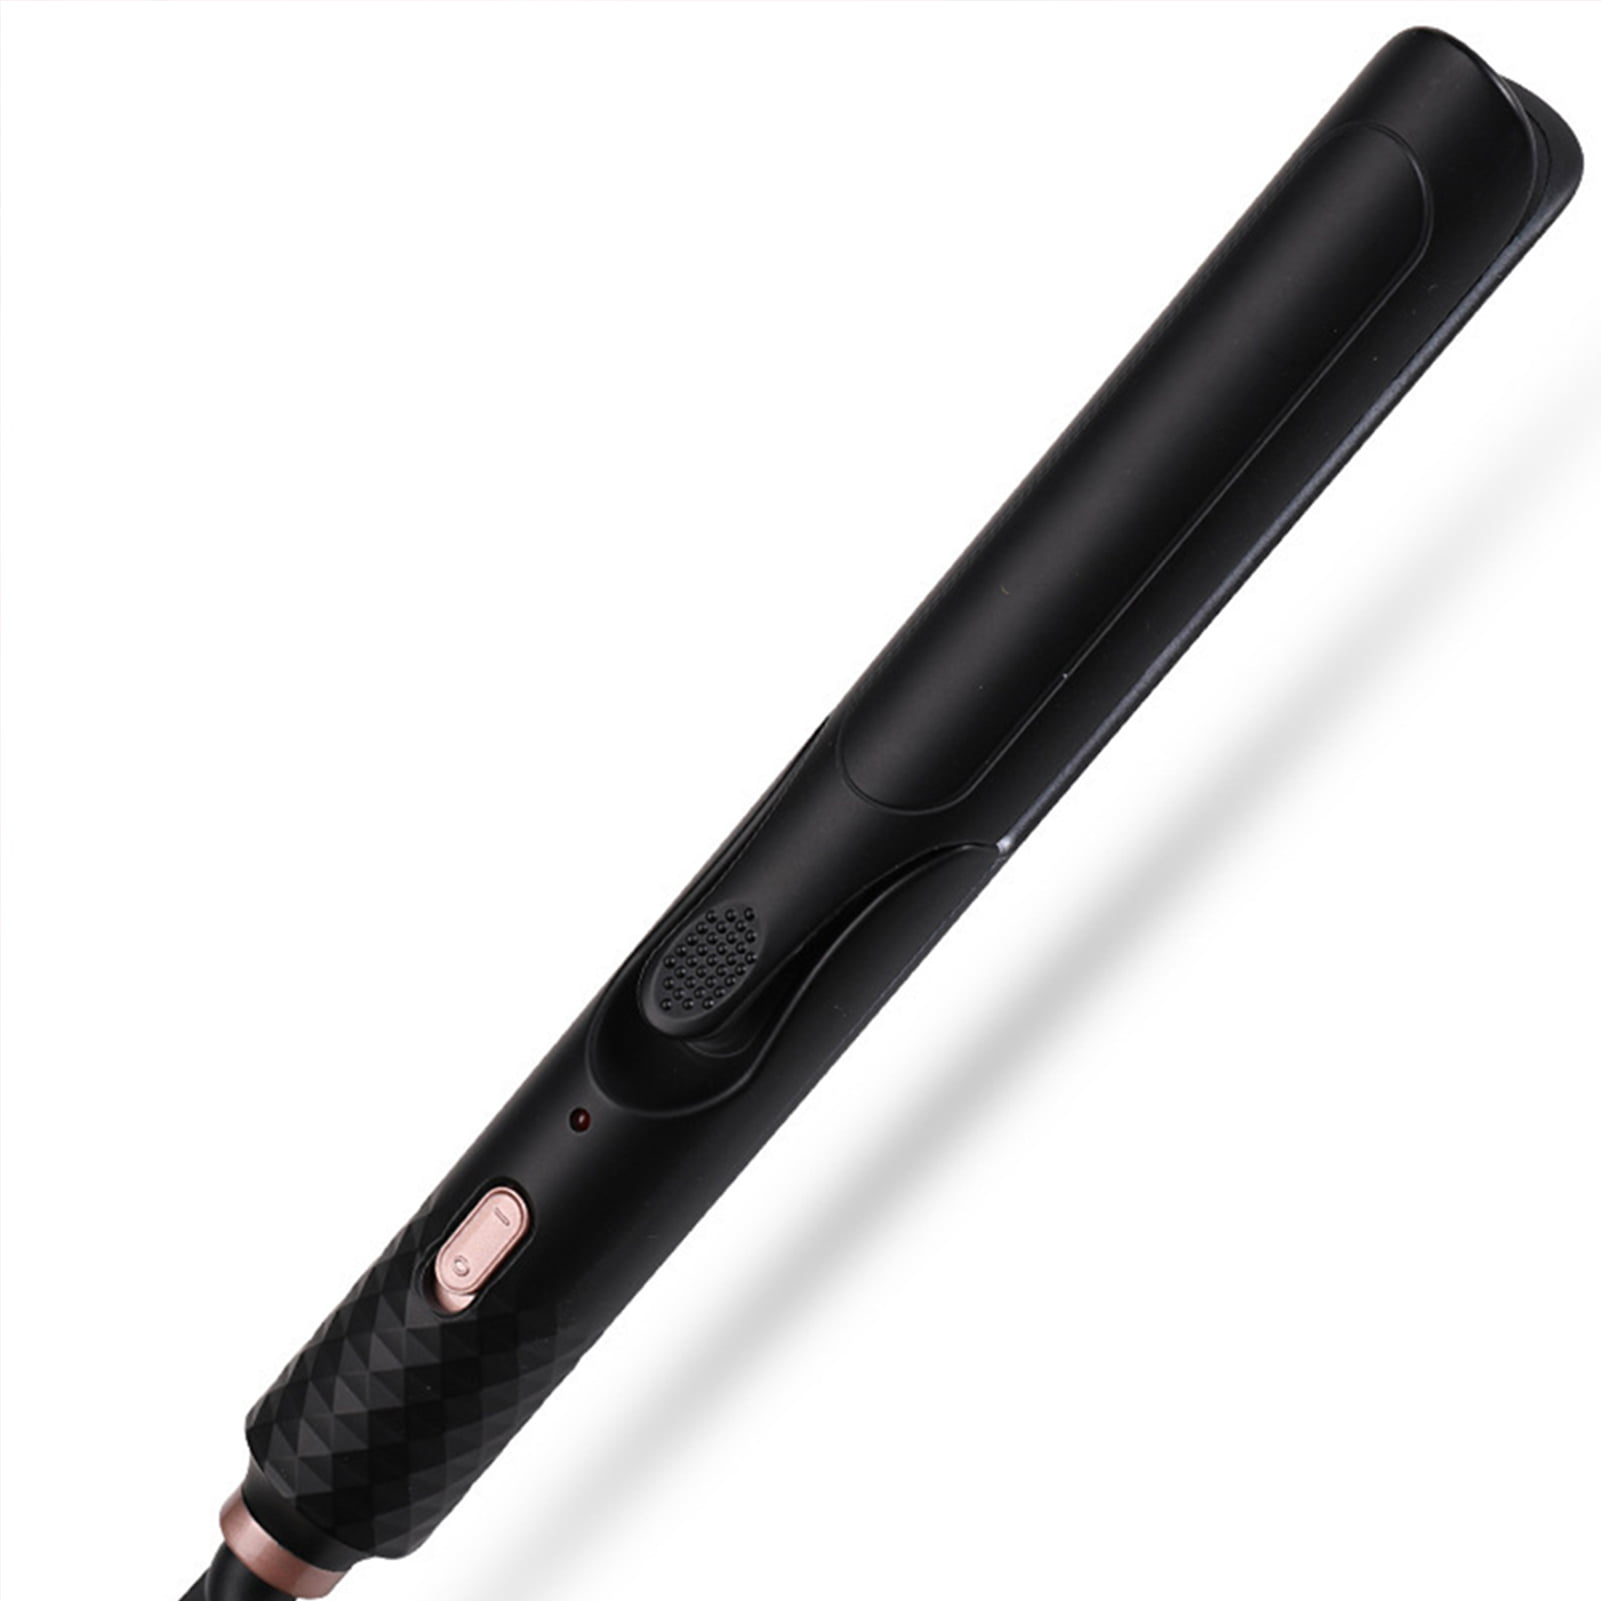 1/2 Suproot Professional 2-in-1 Hair Straightener Curling Iron $7.87 Free Shipping w/ Walmart or on $35